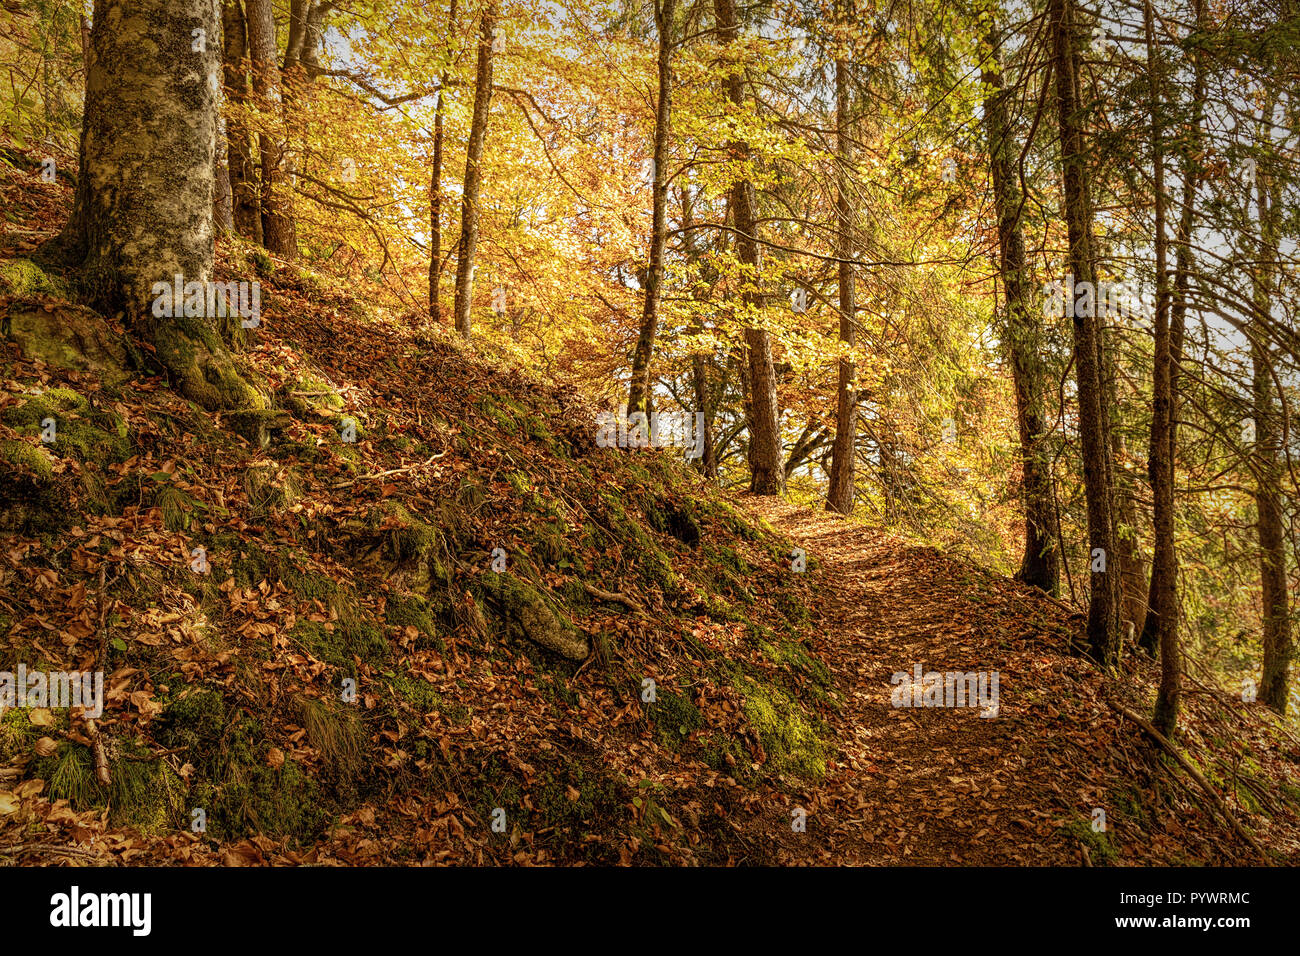 Hiking impression in the Black Forest along the Roetenbach in Autumn, Germany. Magical Autumn Forrest. Colorful Fall Leaves. Romantic Background. Stock Photo